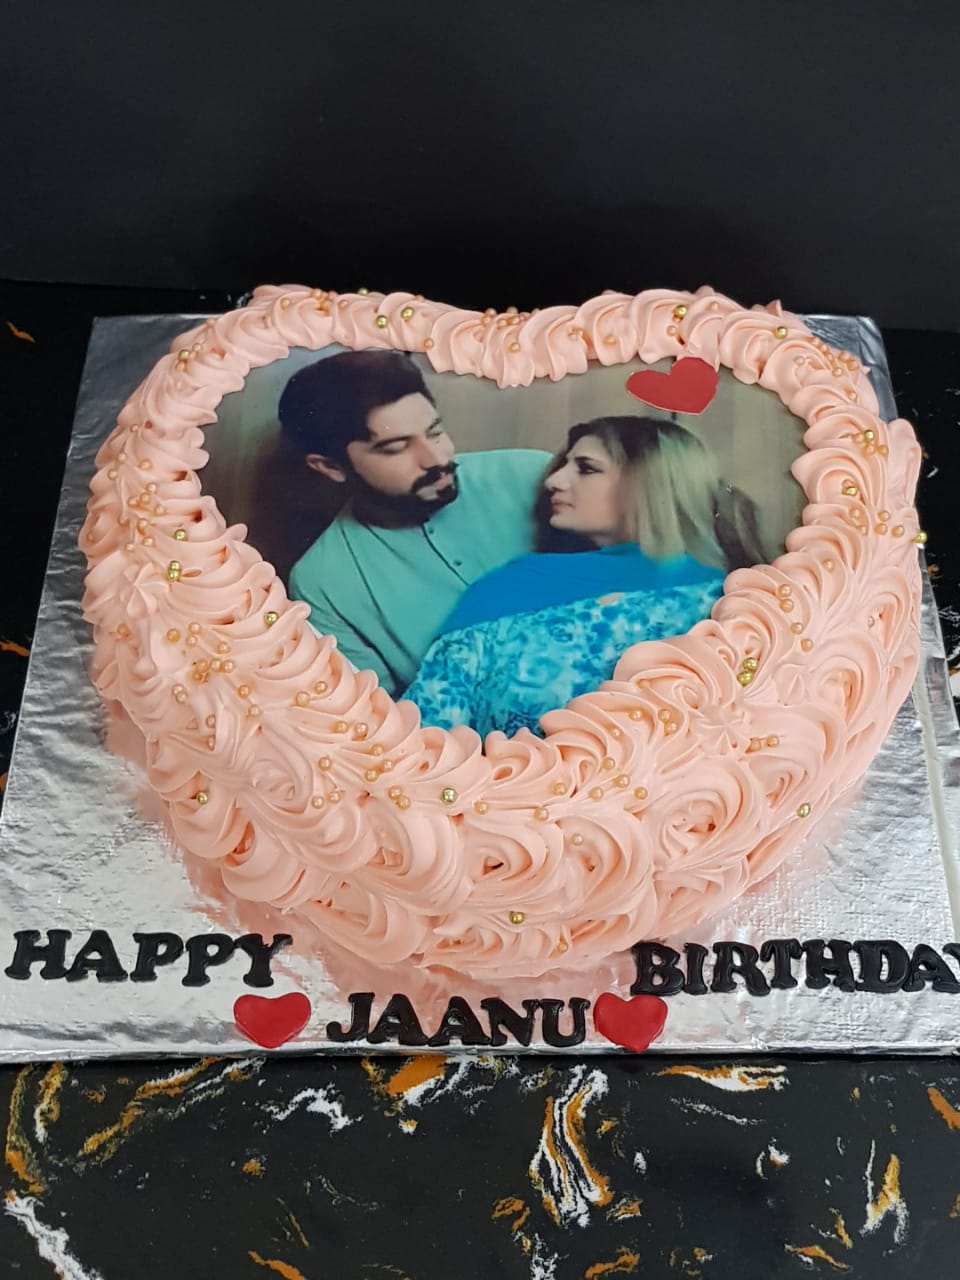 Edible picture cakes for your events